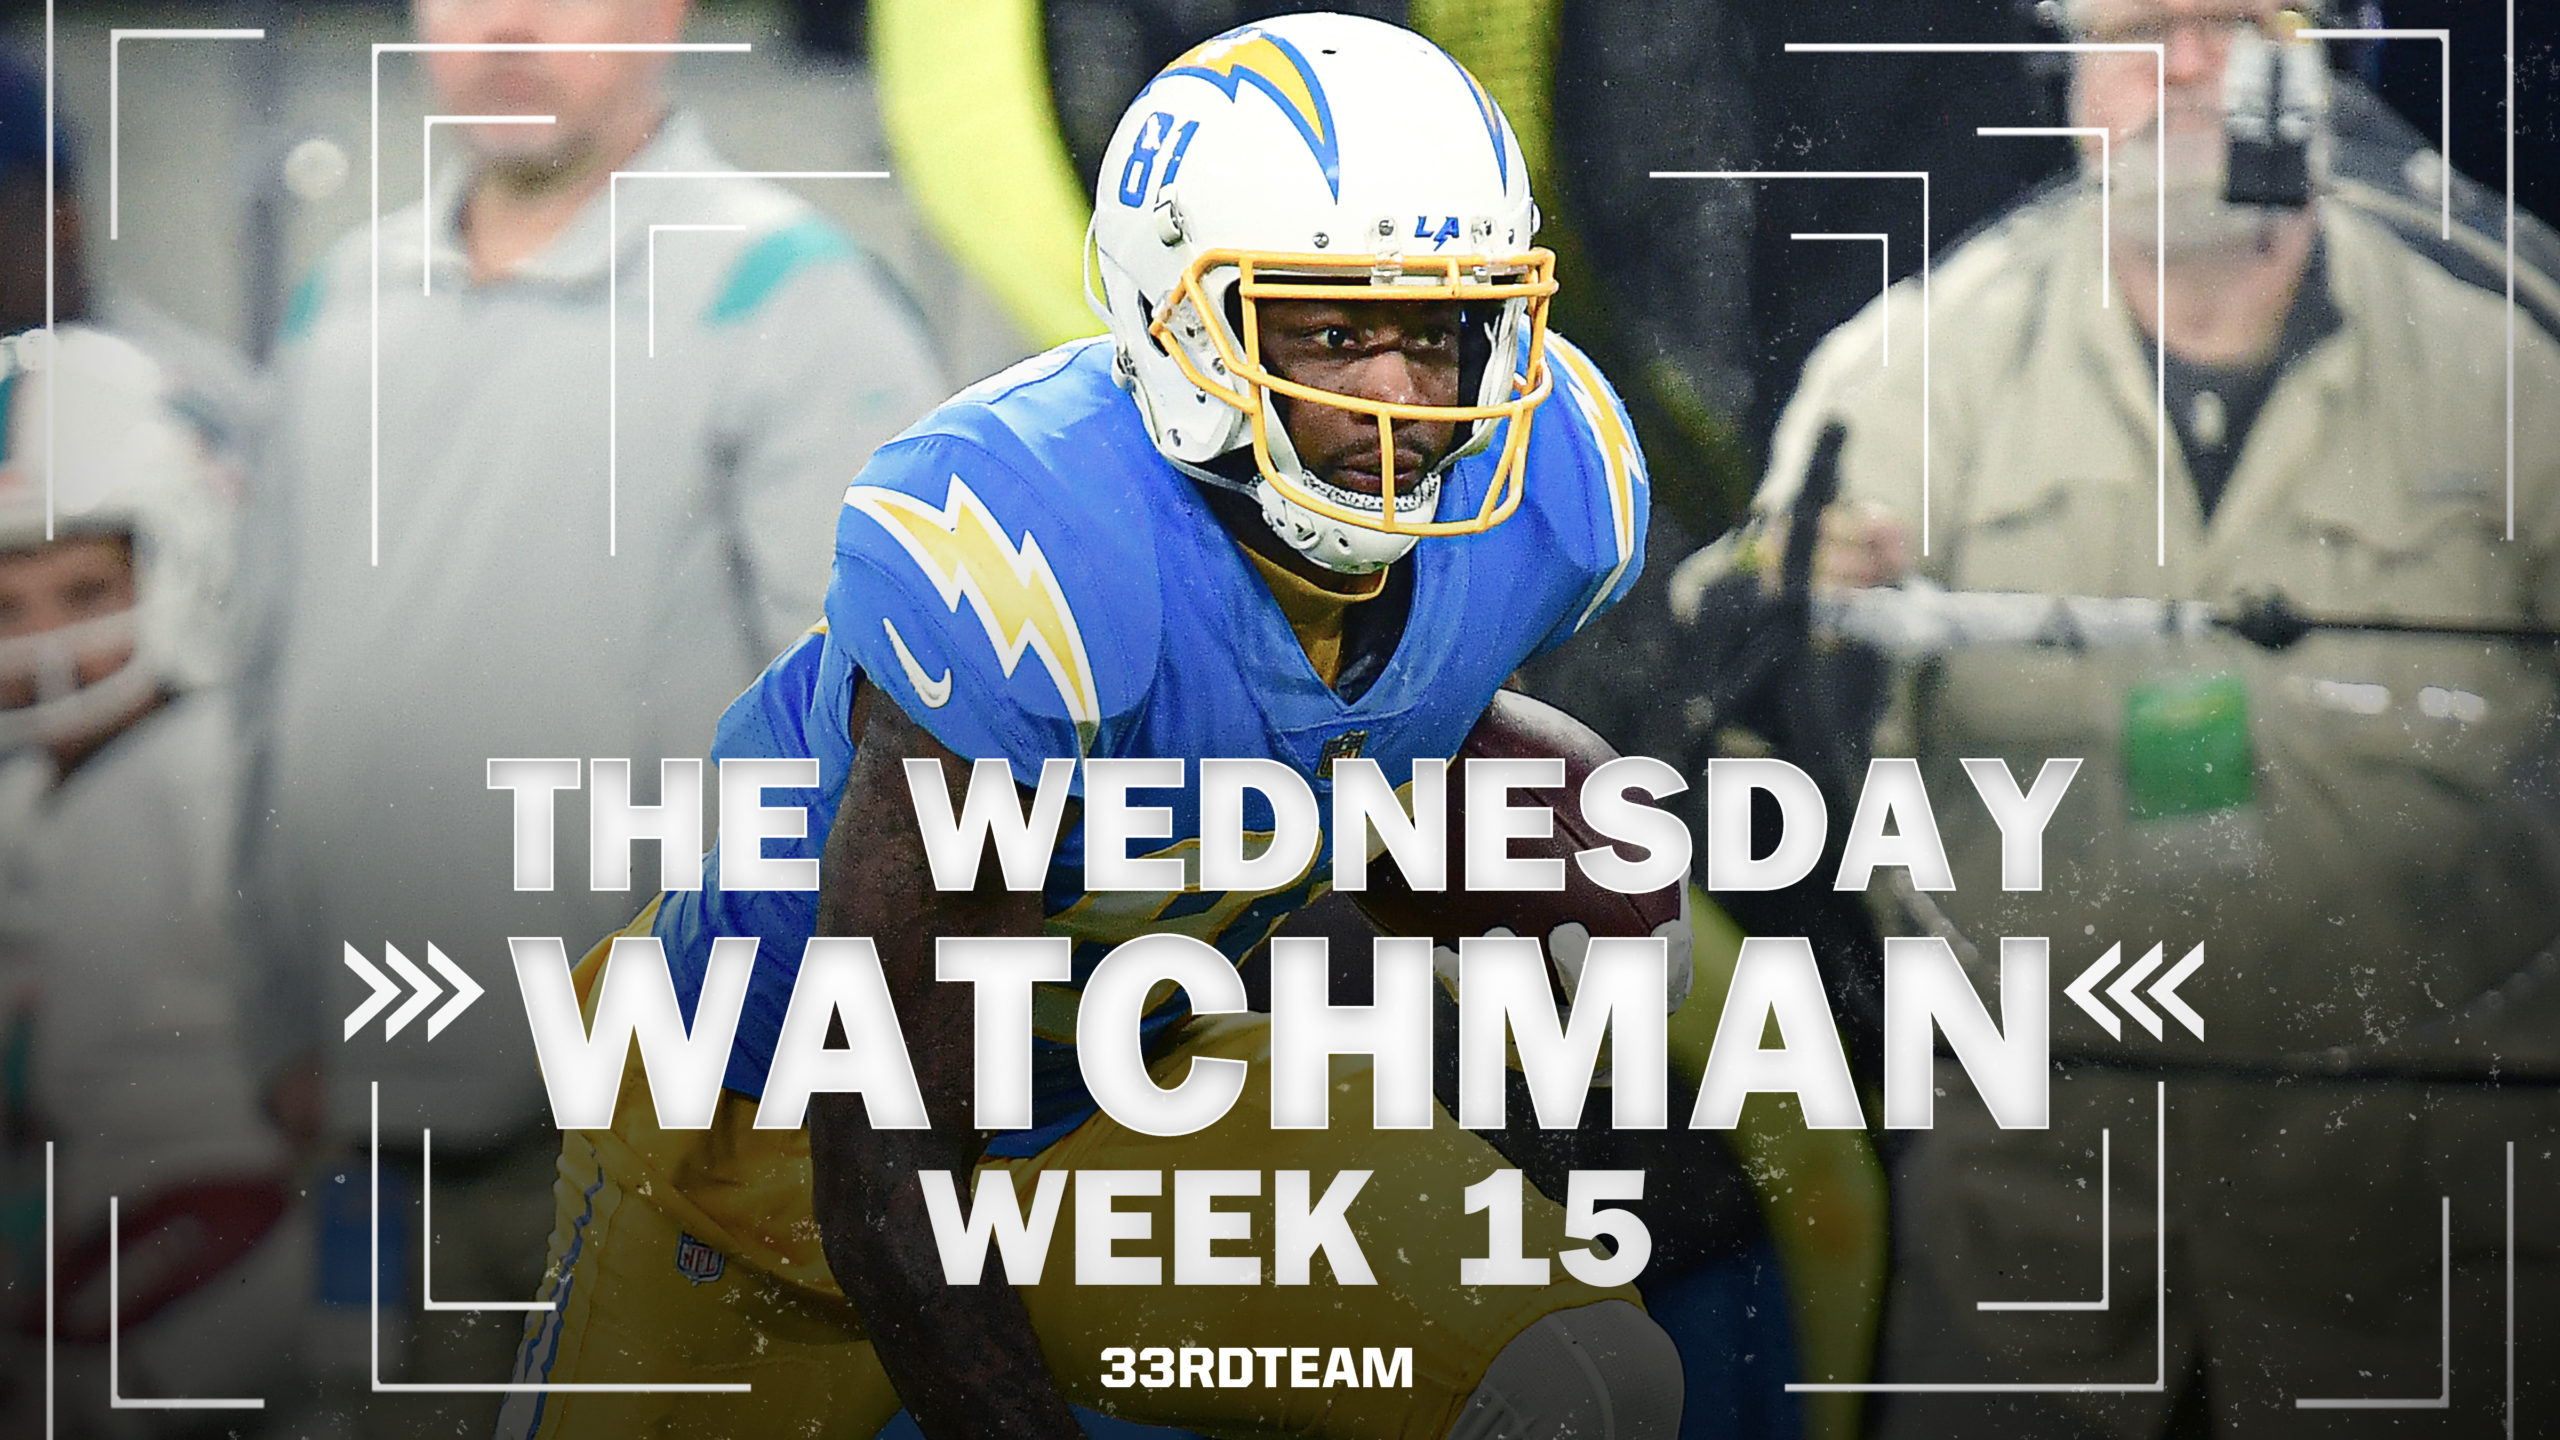 The Wednesday Watchman: NFL Week 15 Betting, DFS, Fantasy Information to Know